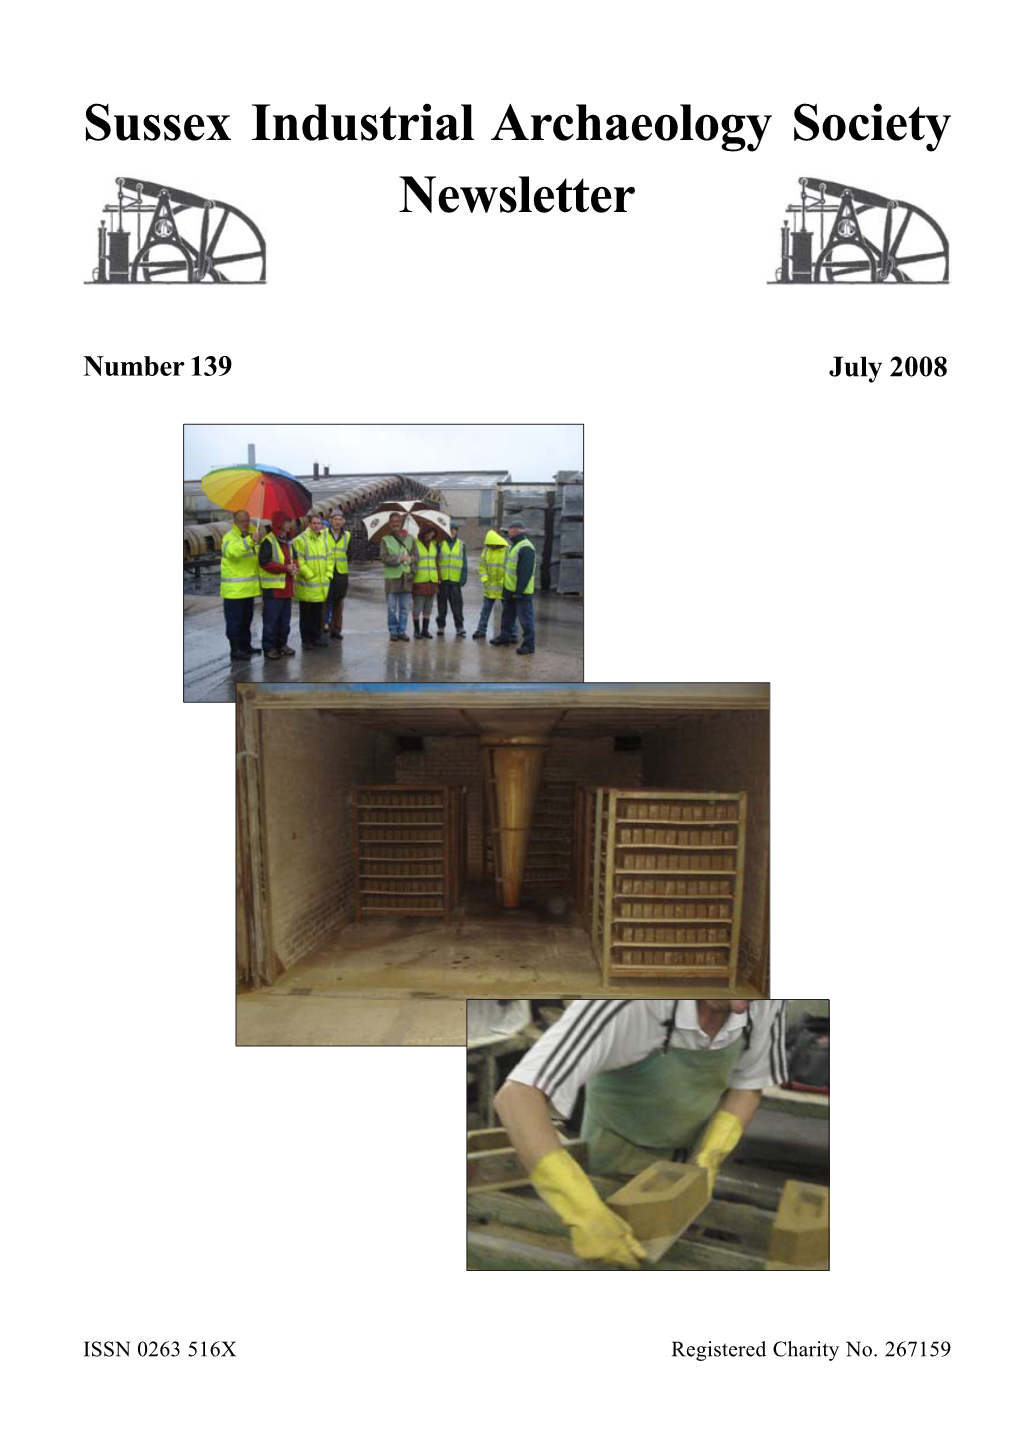 Sussex Industrial Archaeology Society Newsletter